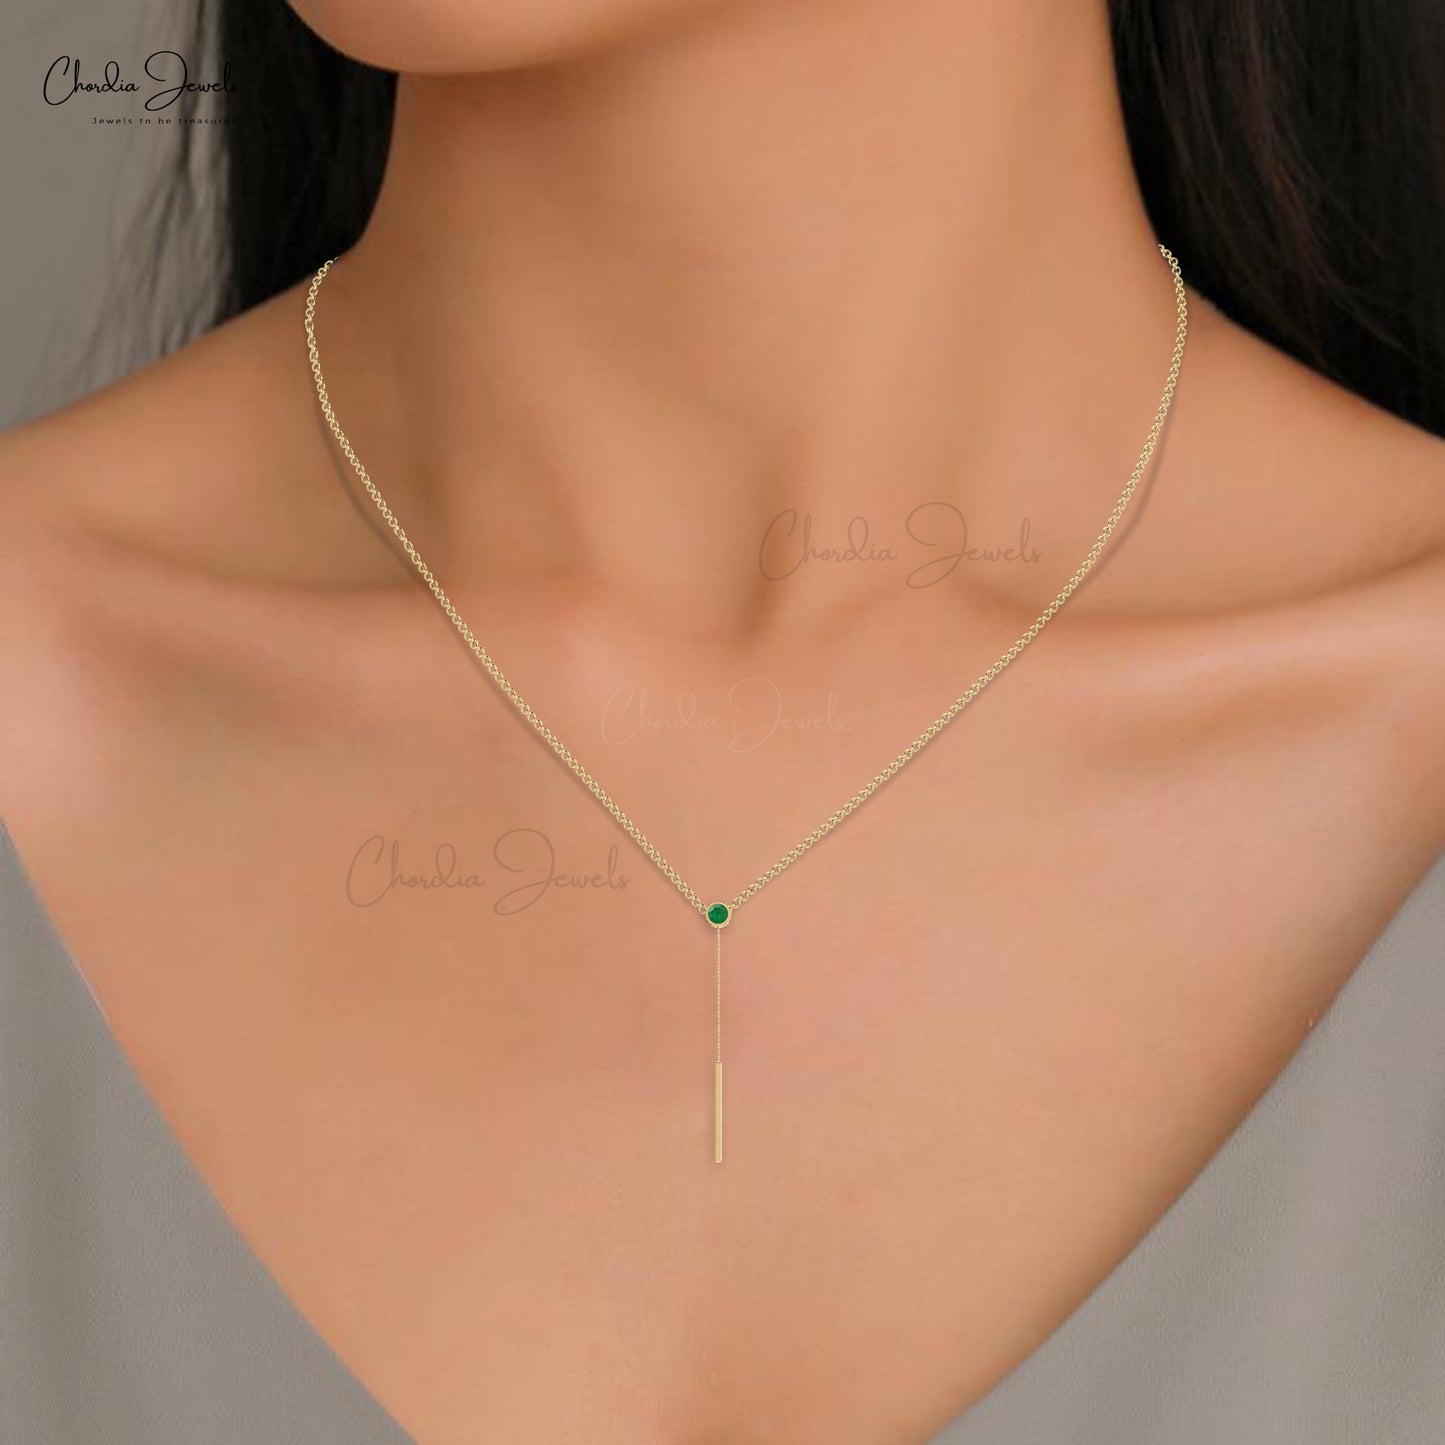 Modern and Stylish Lariat Necklace Pendant in 14 Real Gold Natural Green Emerald Studded Jewelry For Valentine's Day Gift